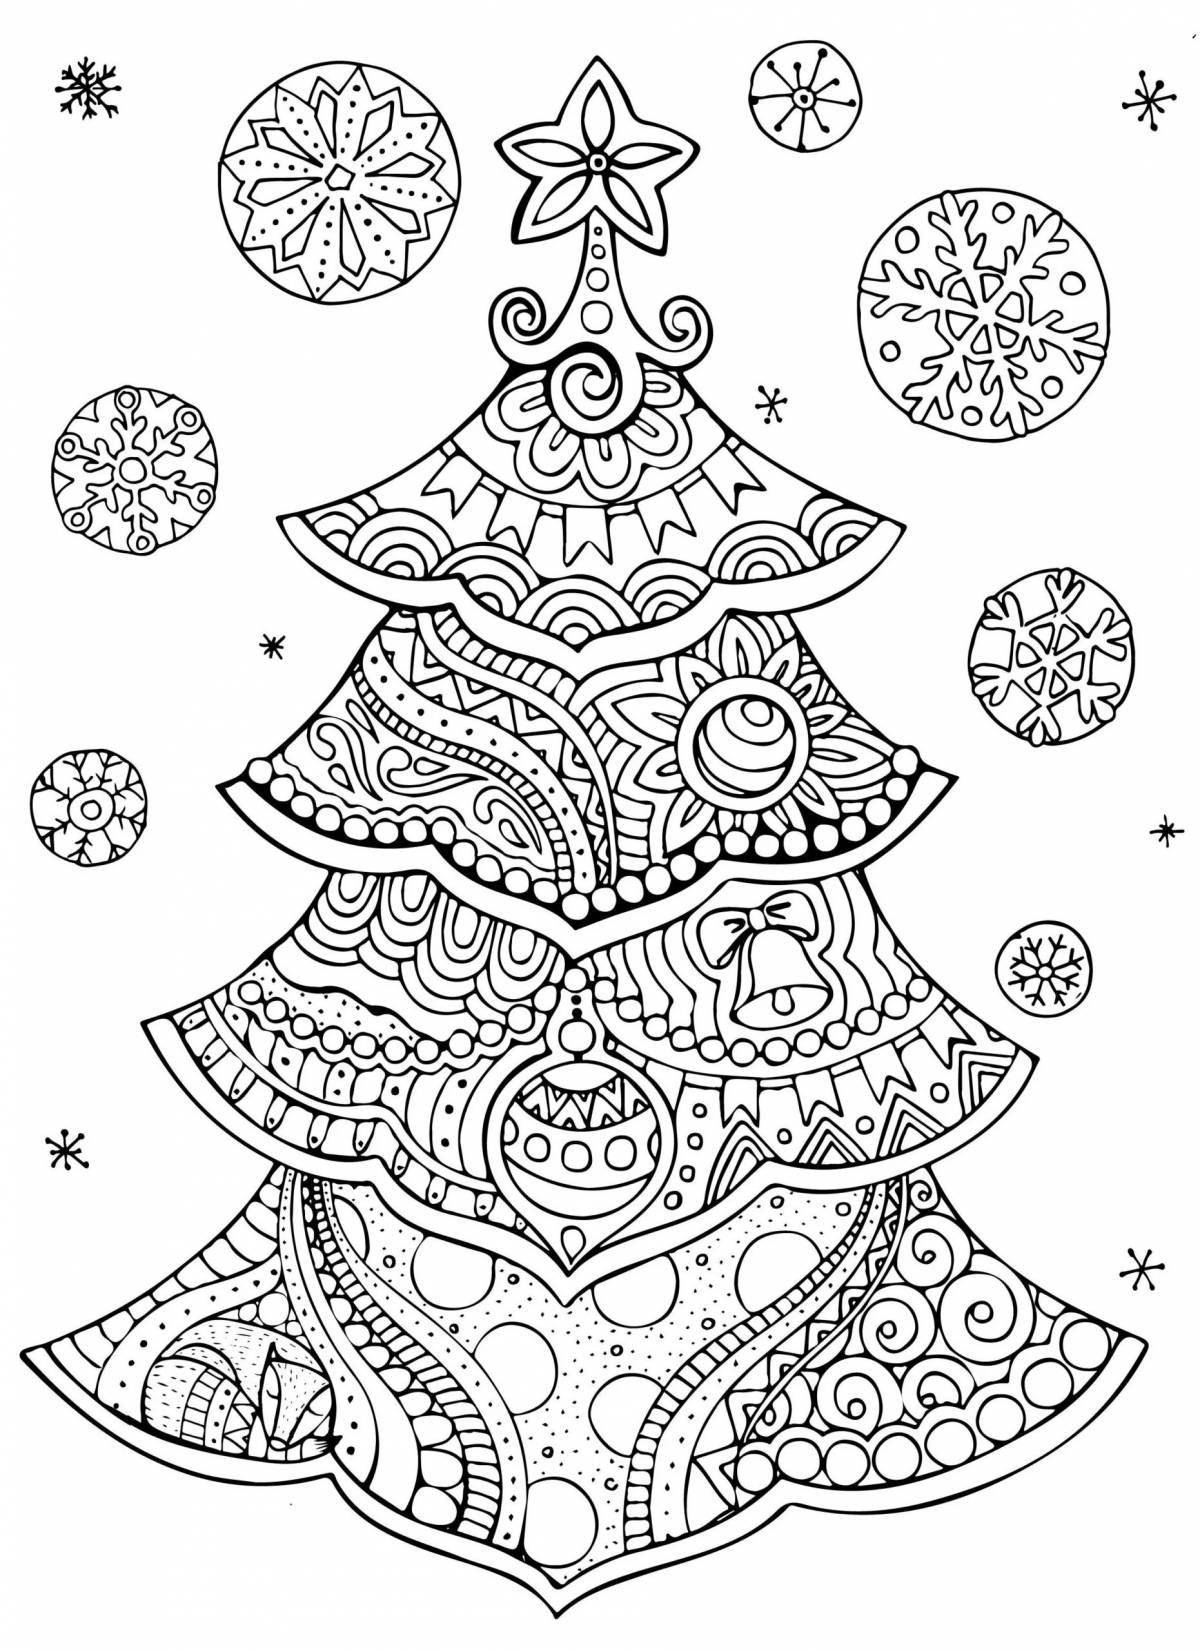 Colouring bright Christmas tree for children 6-7 years old